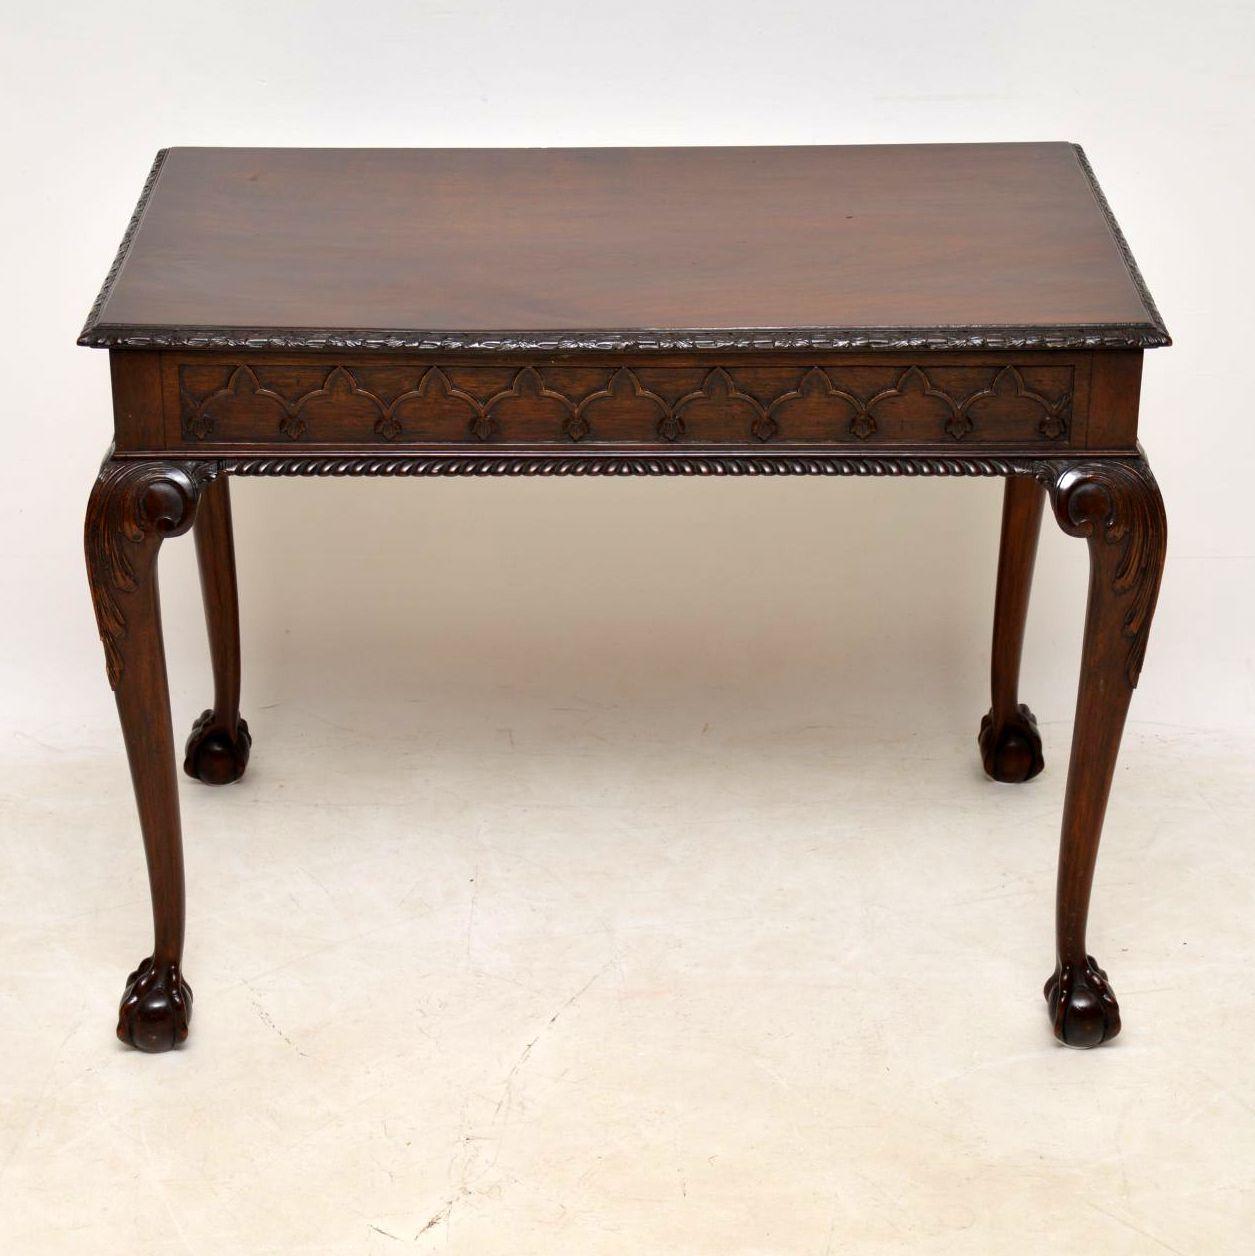 This very impressive solid mahogany side table is antique Chippendale style & dates from around the 1890s period. It’s extremely fine quality and has some very intricate details. The top edge is finely carved with Gothic design mouldings below.